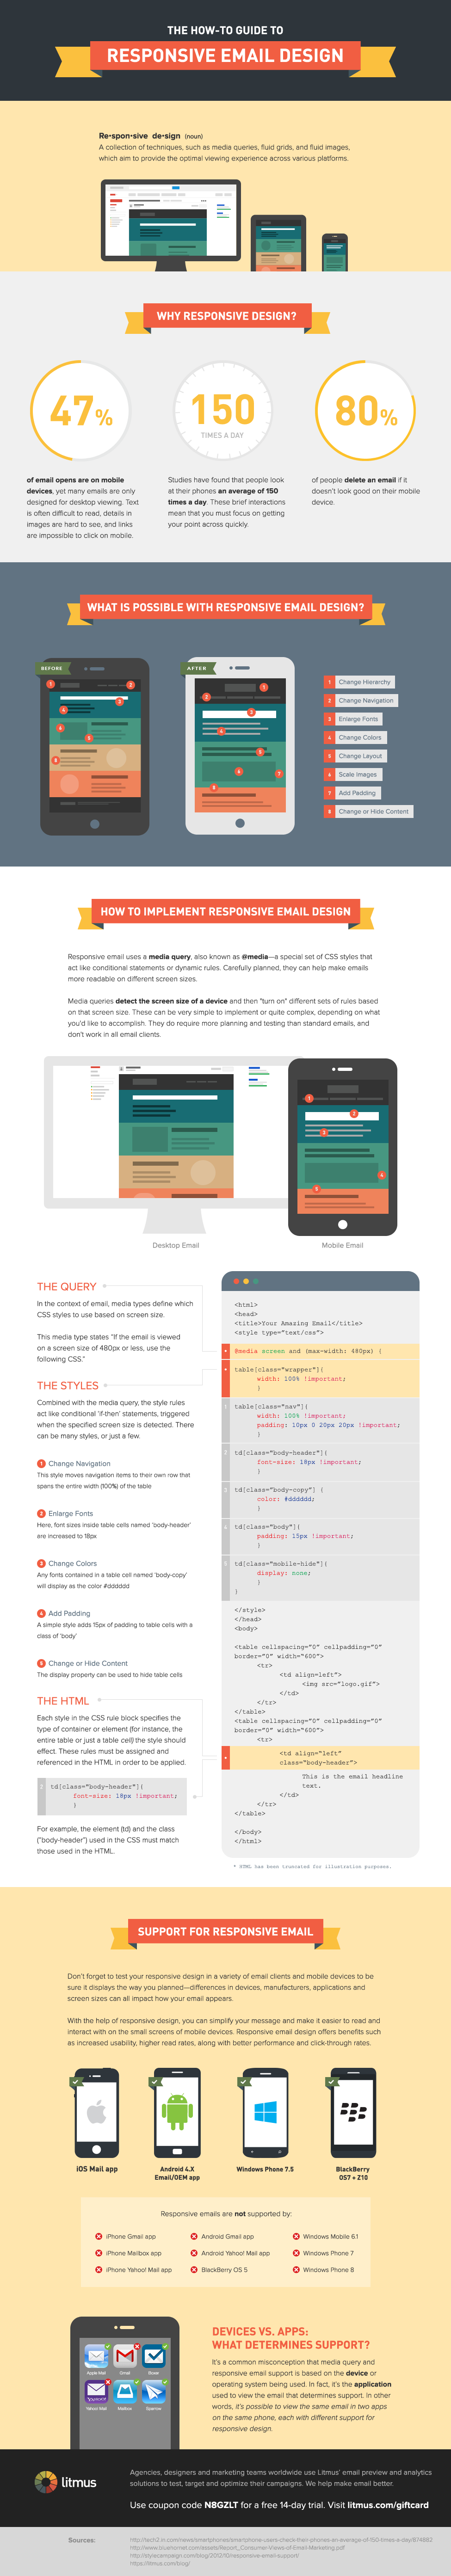 Designing Mobile-Friendly Emails: Best Practices and Tips